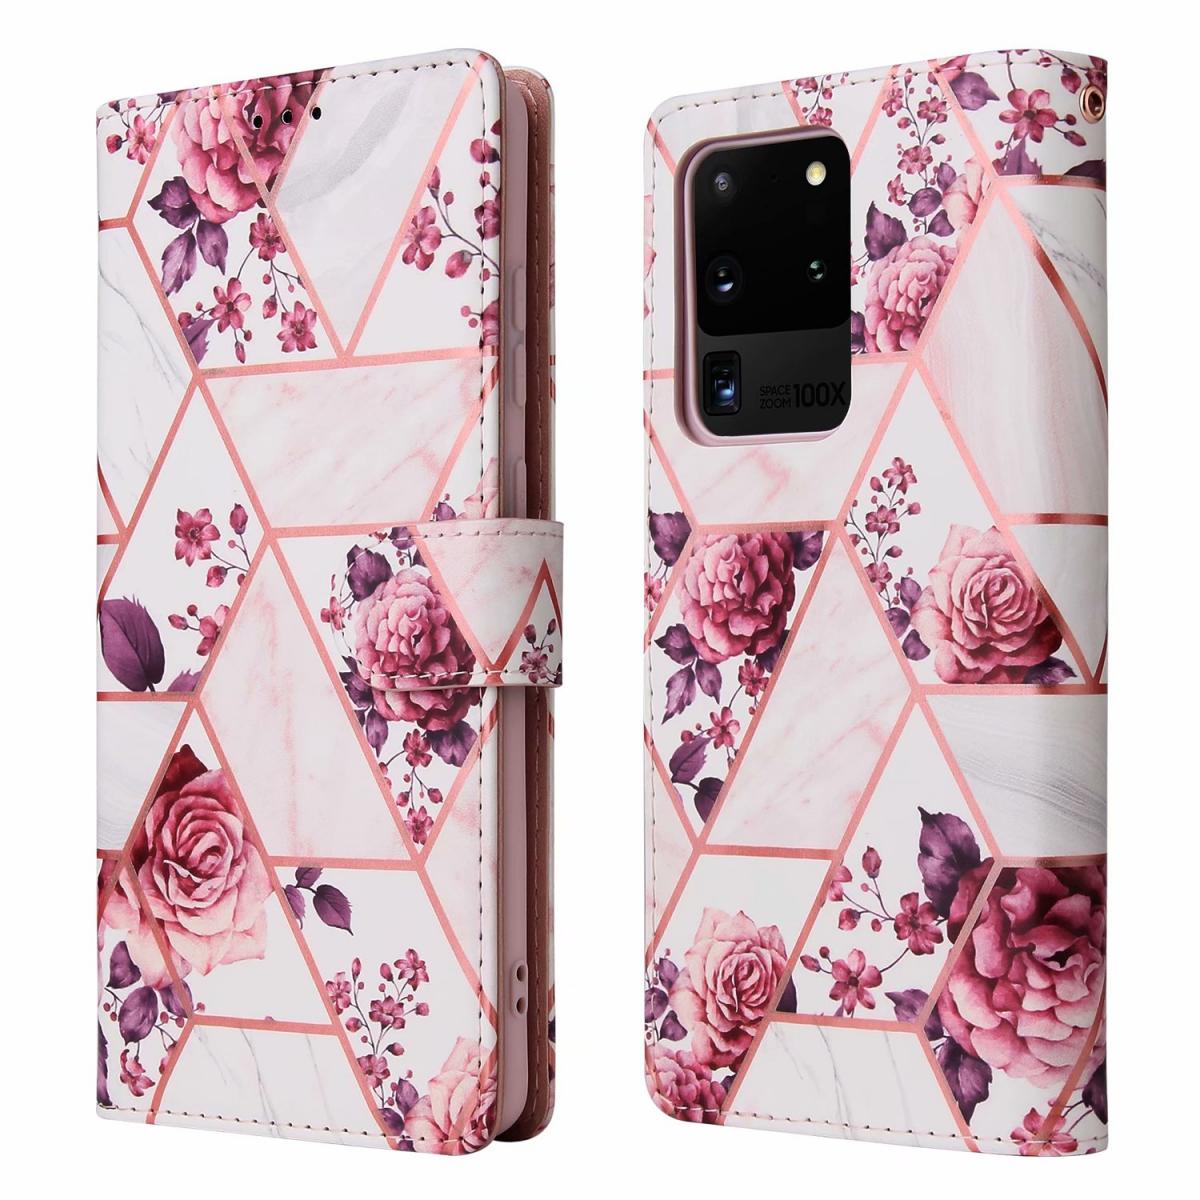 A-One Brand - Marble Grid Plånboksfodral till Galaxy S20 Plus - Roses